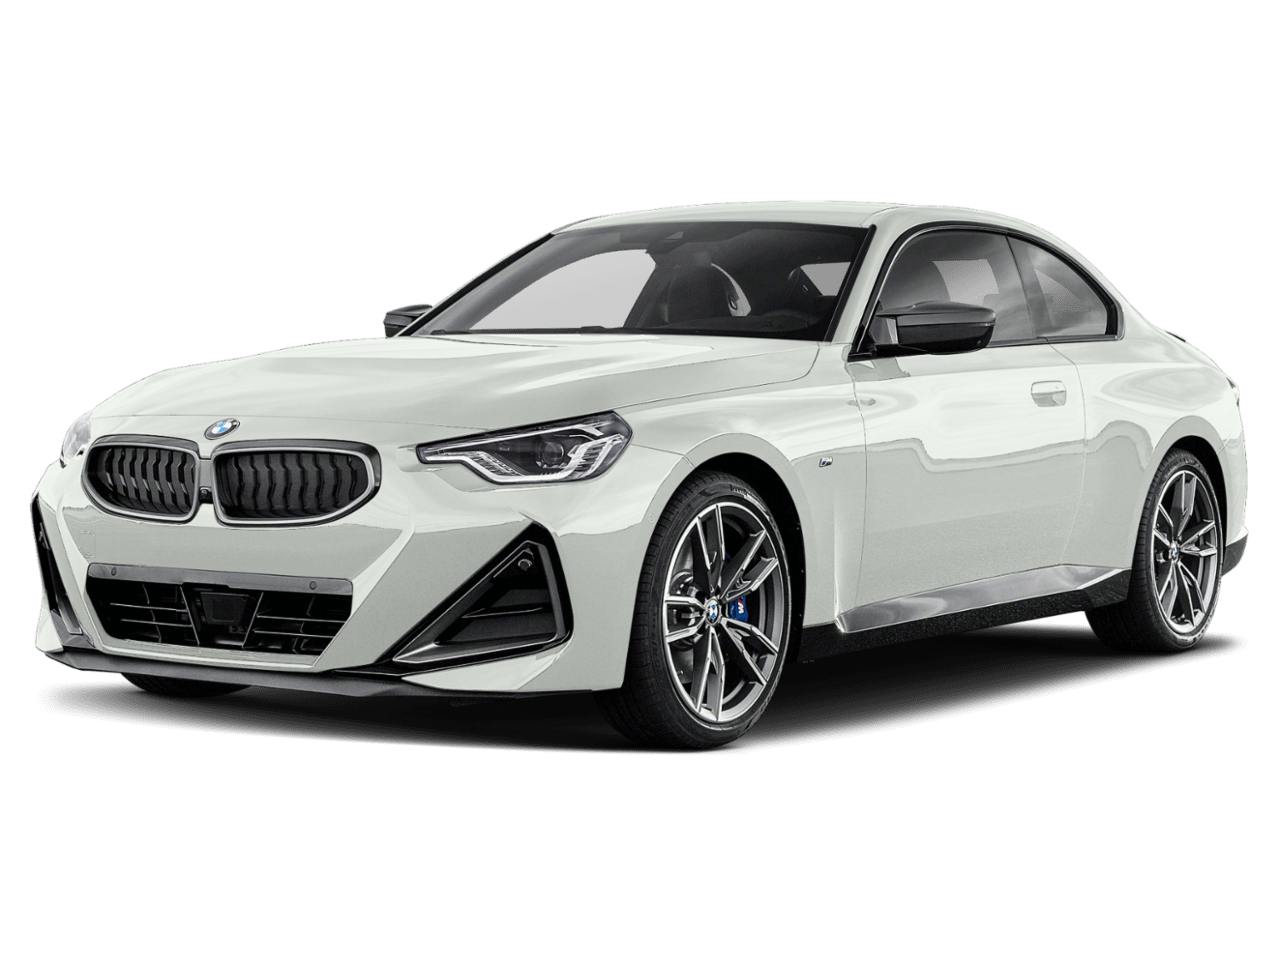 Small photo of the M240i xDrive trim